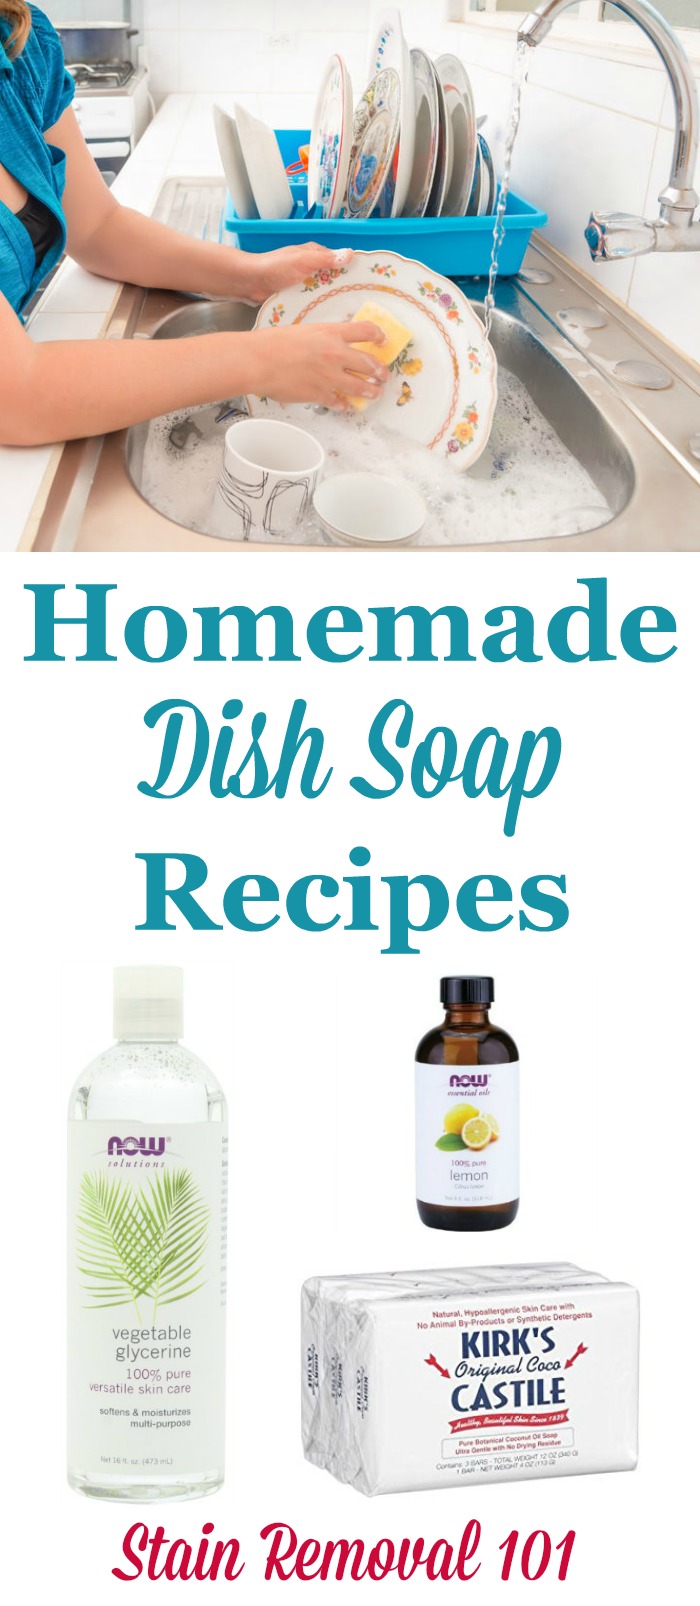 Homemade dish soap recipes you can use to wash your dishes, and choose your own scent {on Stain Removal 101}